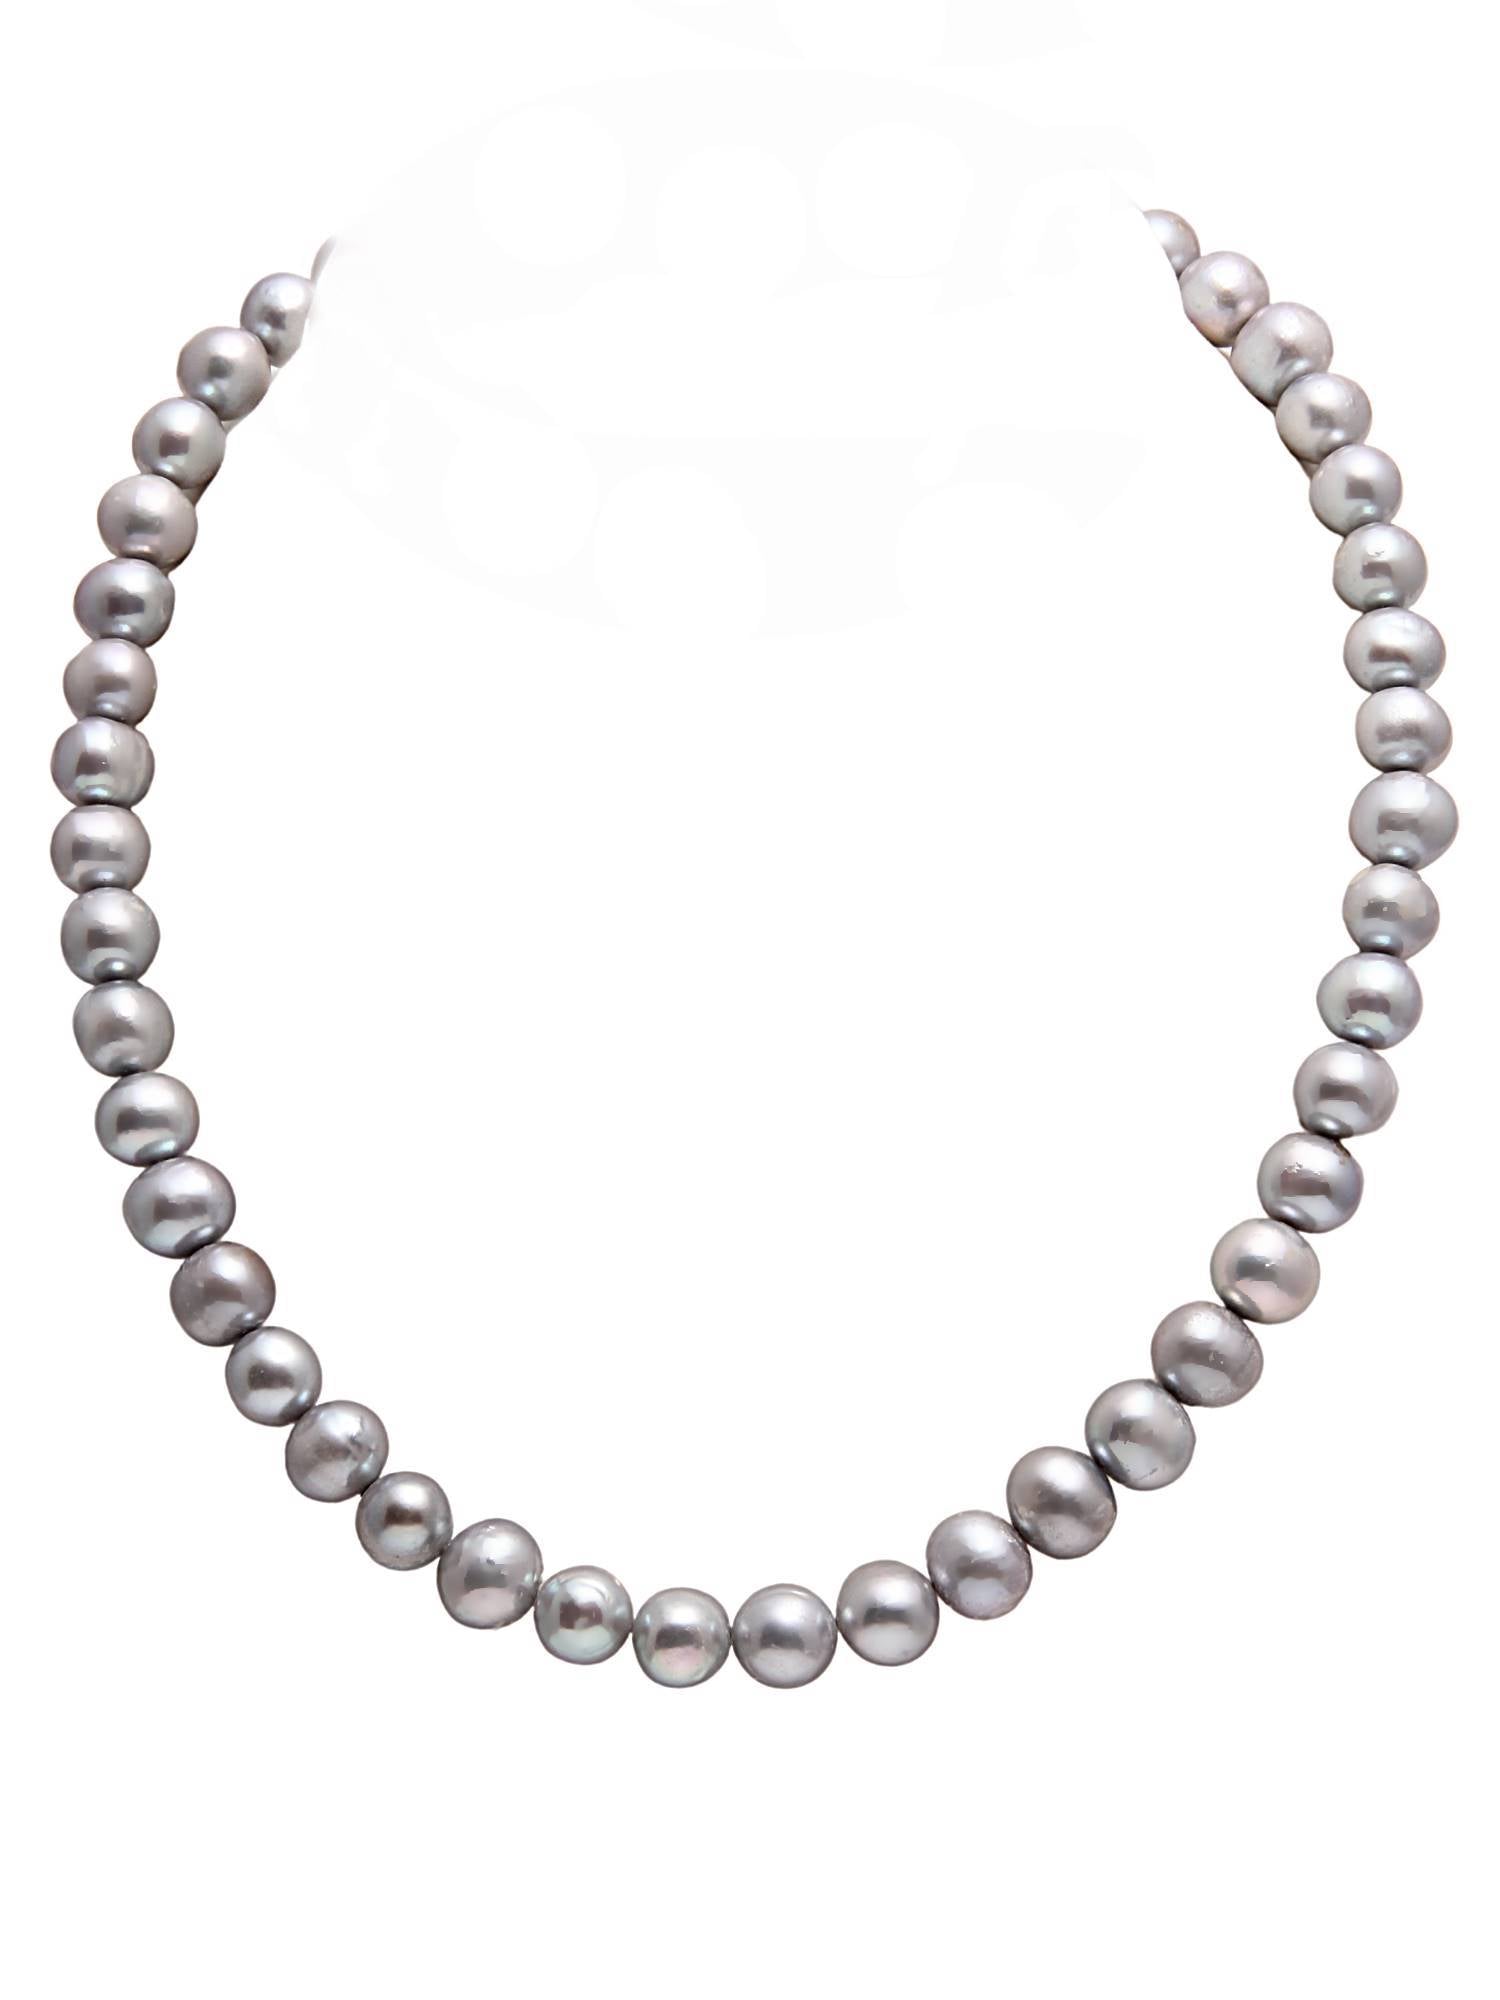 Semi-Round Silver Grey (10MM) Natural Freshwater Real Pearl Necklace with 92.5 Sterling Silver Clasp, 330 carats - (F1013)